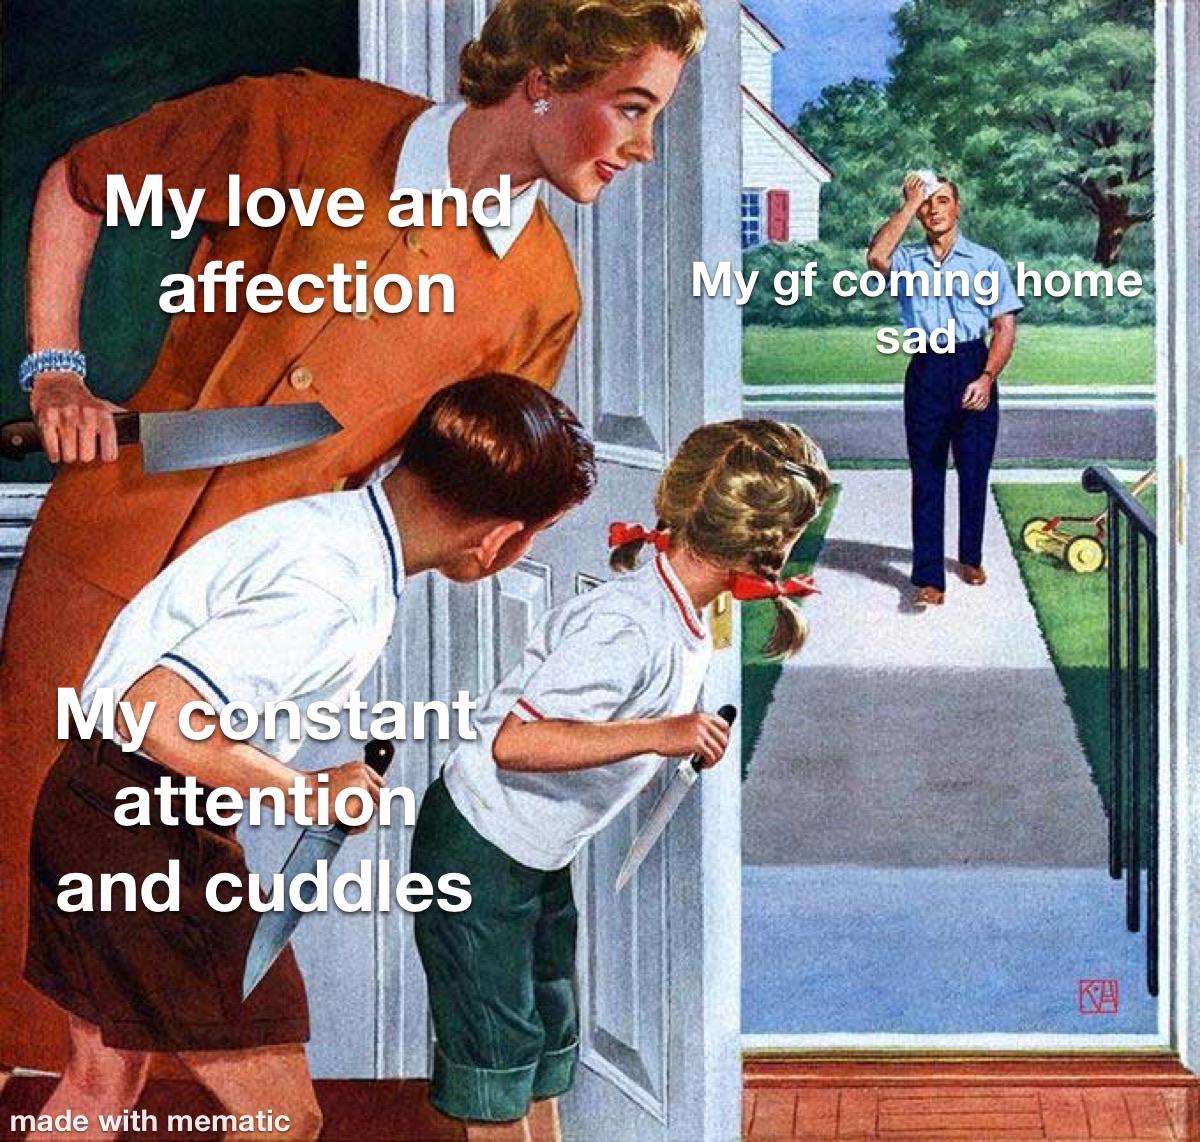 cute wholesome-memes cute text: My love affection atteg i and cud th me s 